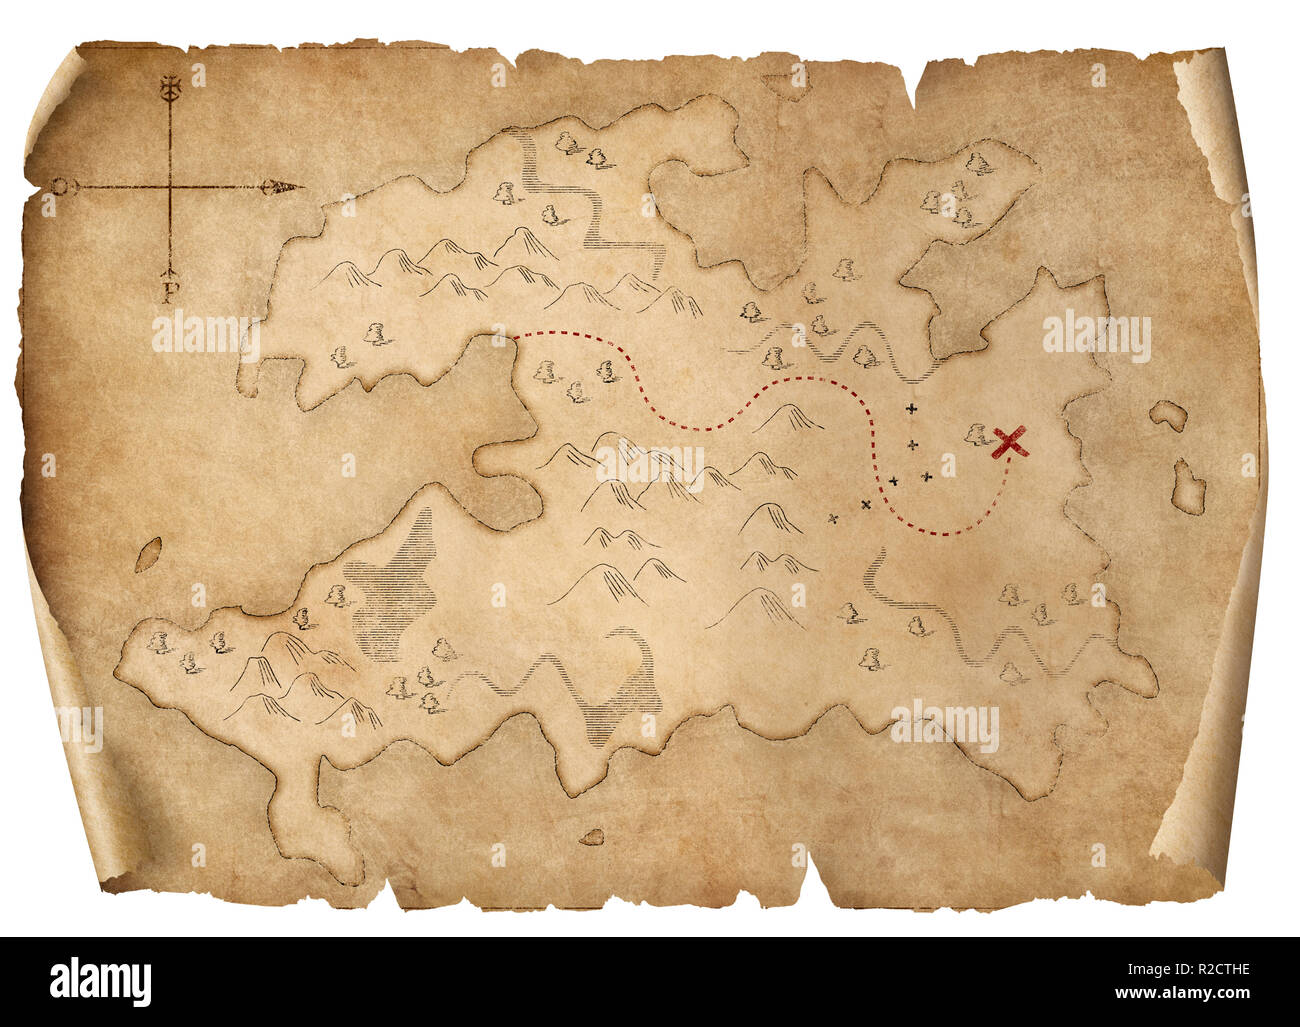 treasure medieval map isolated 3d illustration Stock Photo